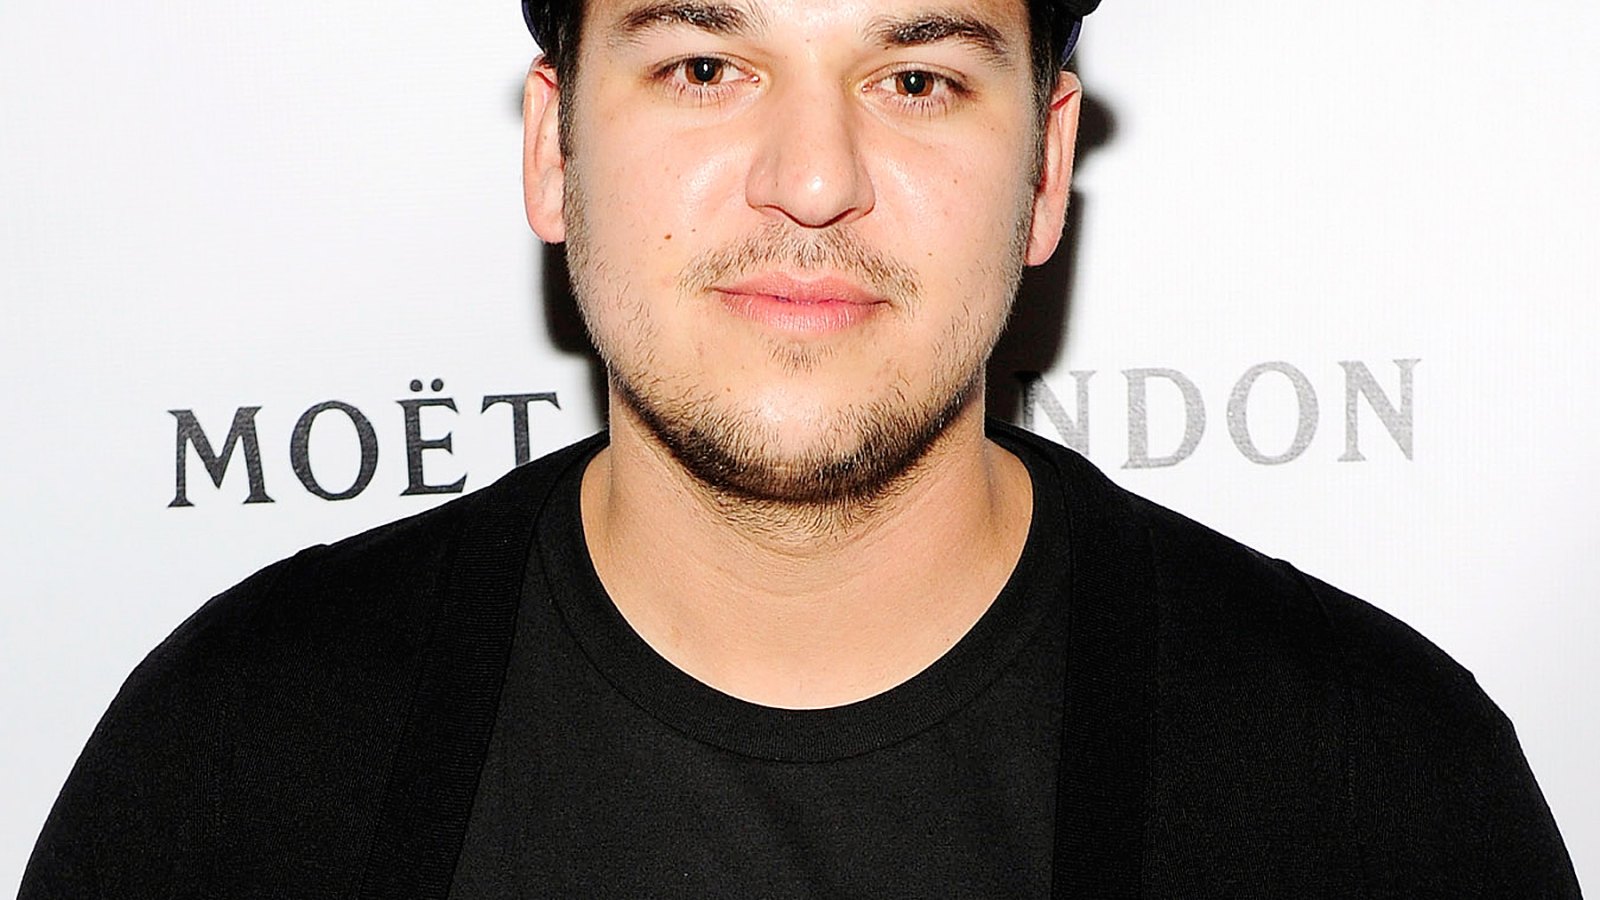 Rob Kardashian attends an event on May 25, 2013 in Las Vegas